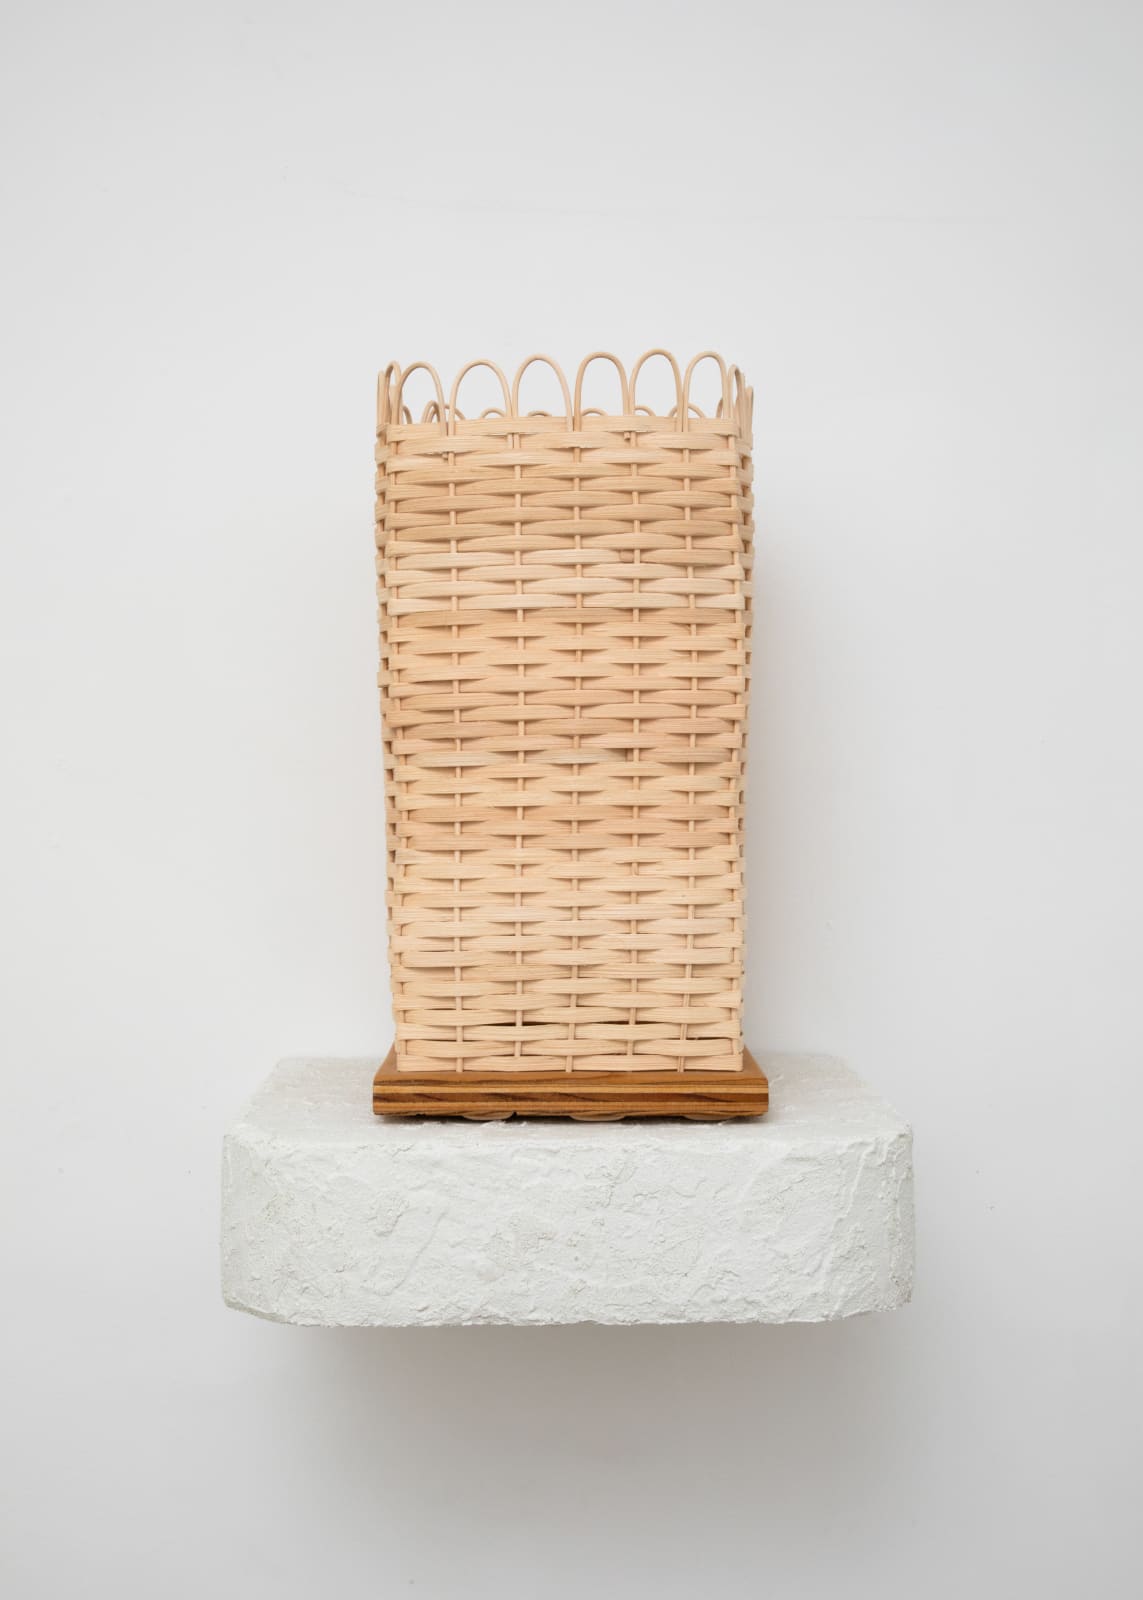 Free-standing sculpture woven with natural reed in the form of a tall square basket, that sits on top of a white stucco shelf. 